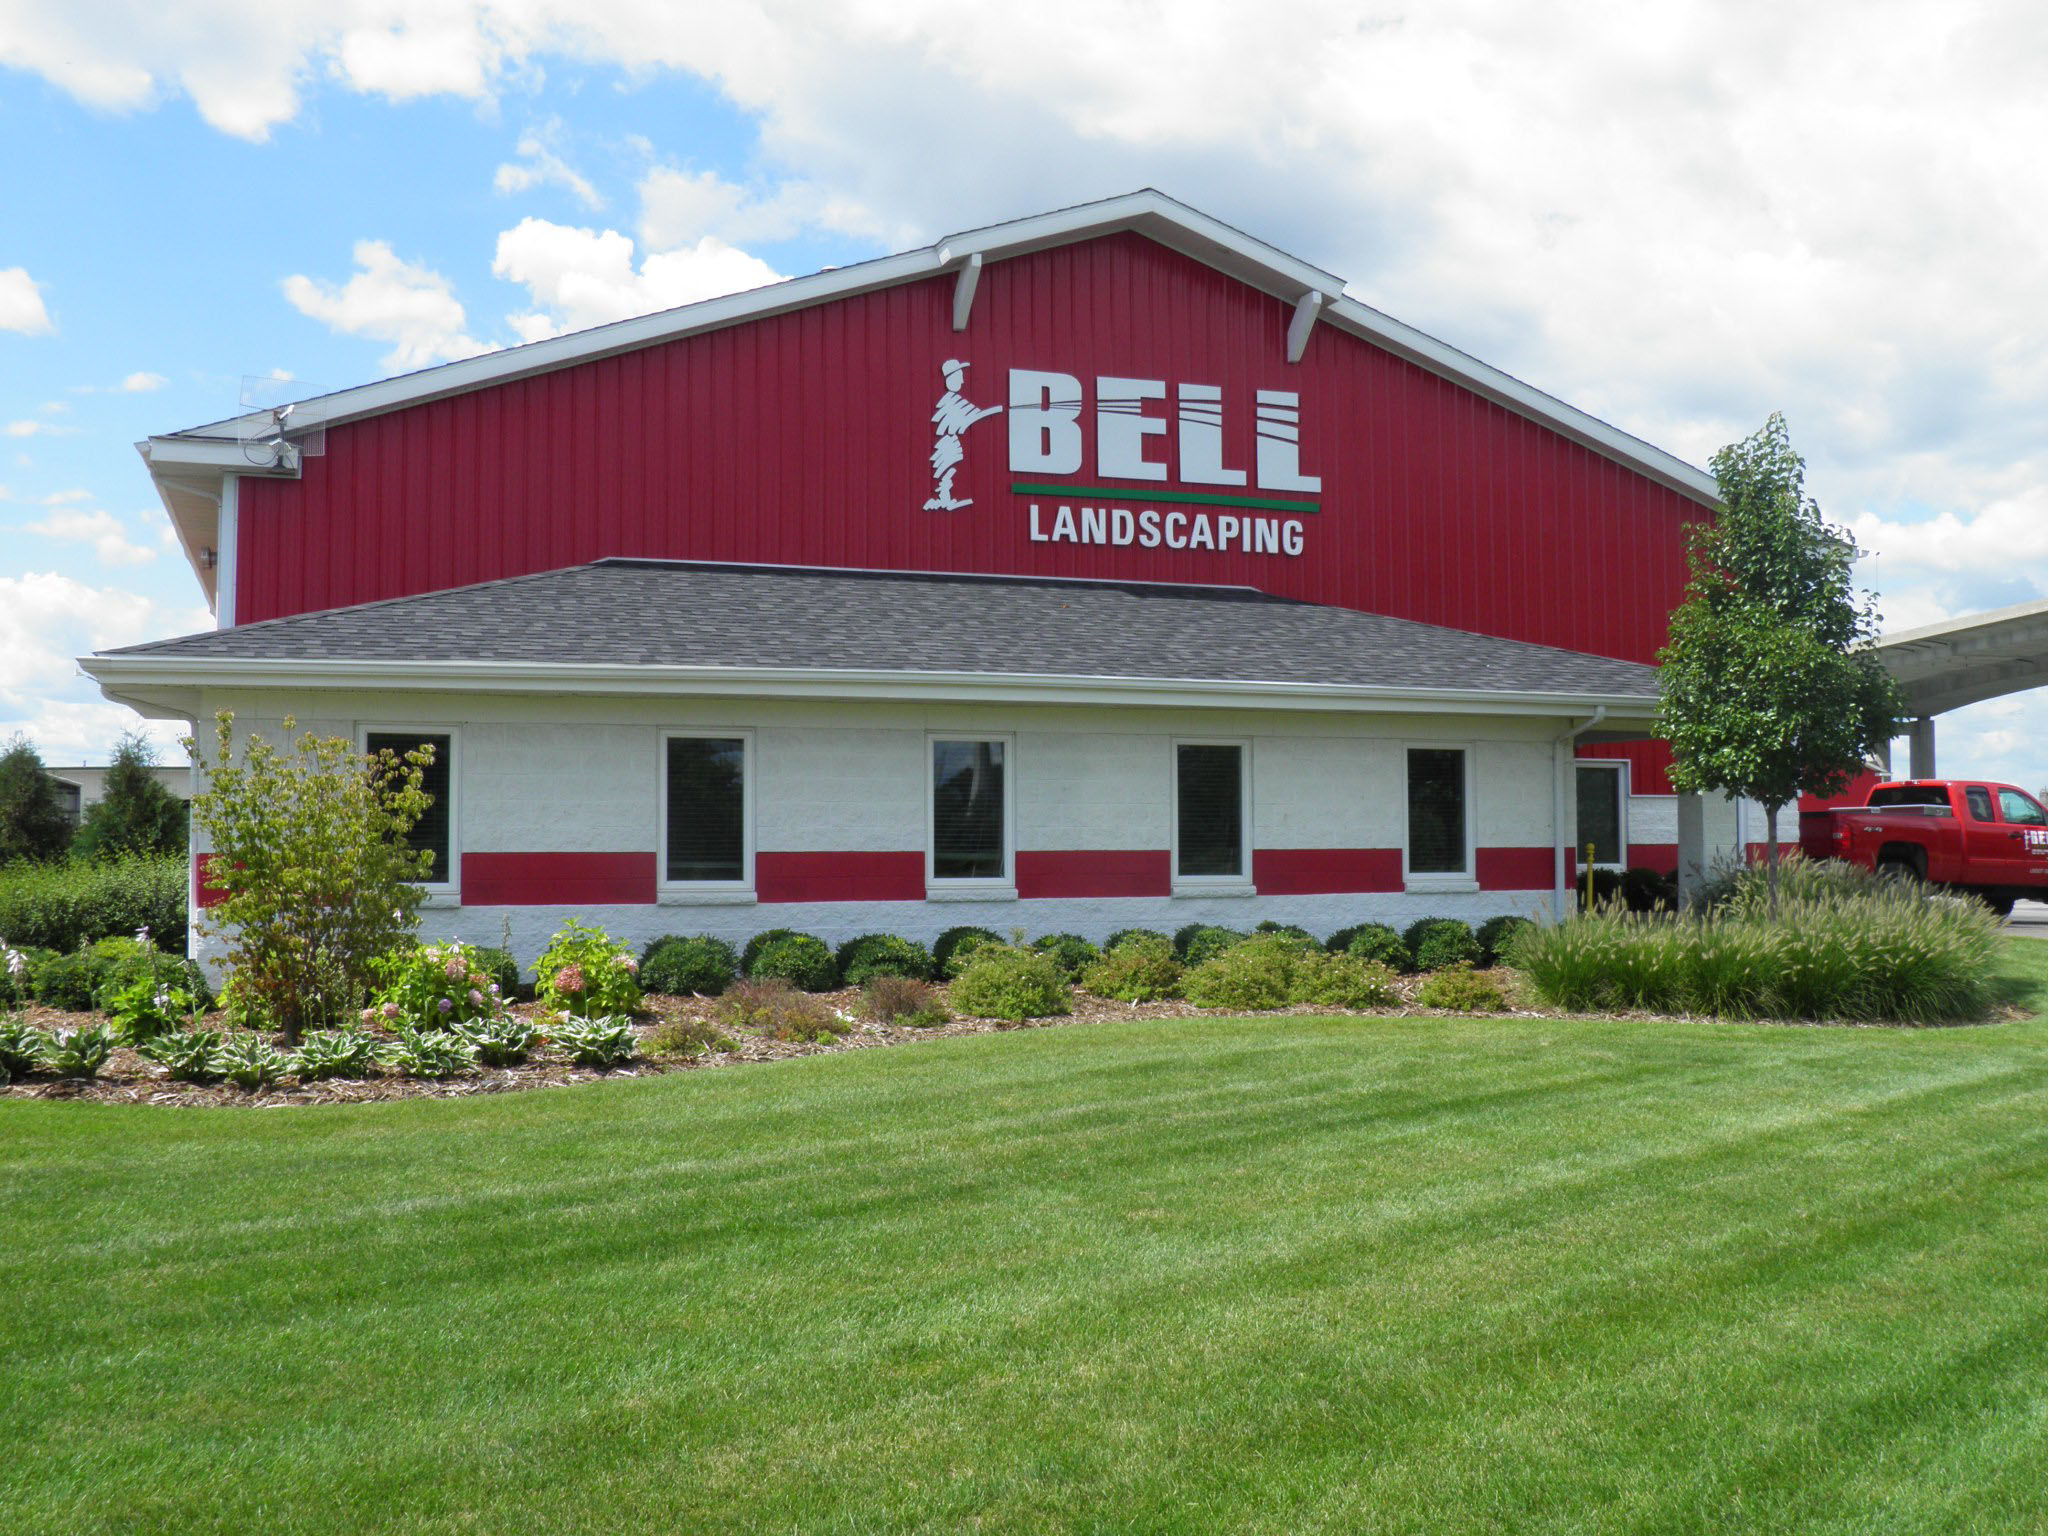 Bell landscaping